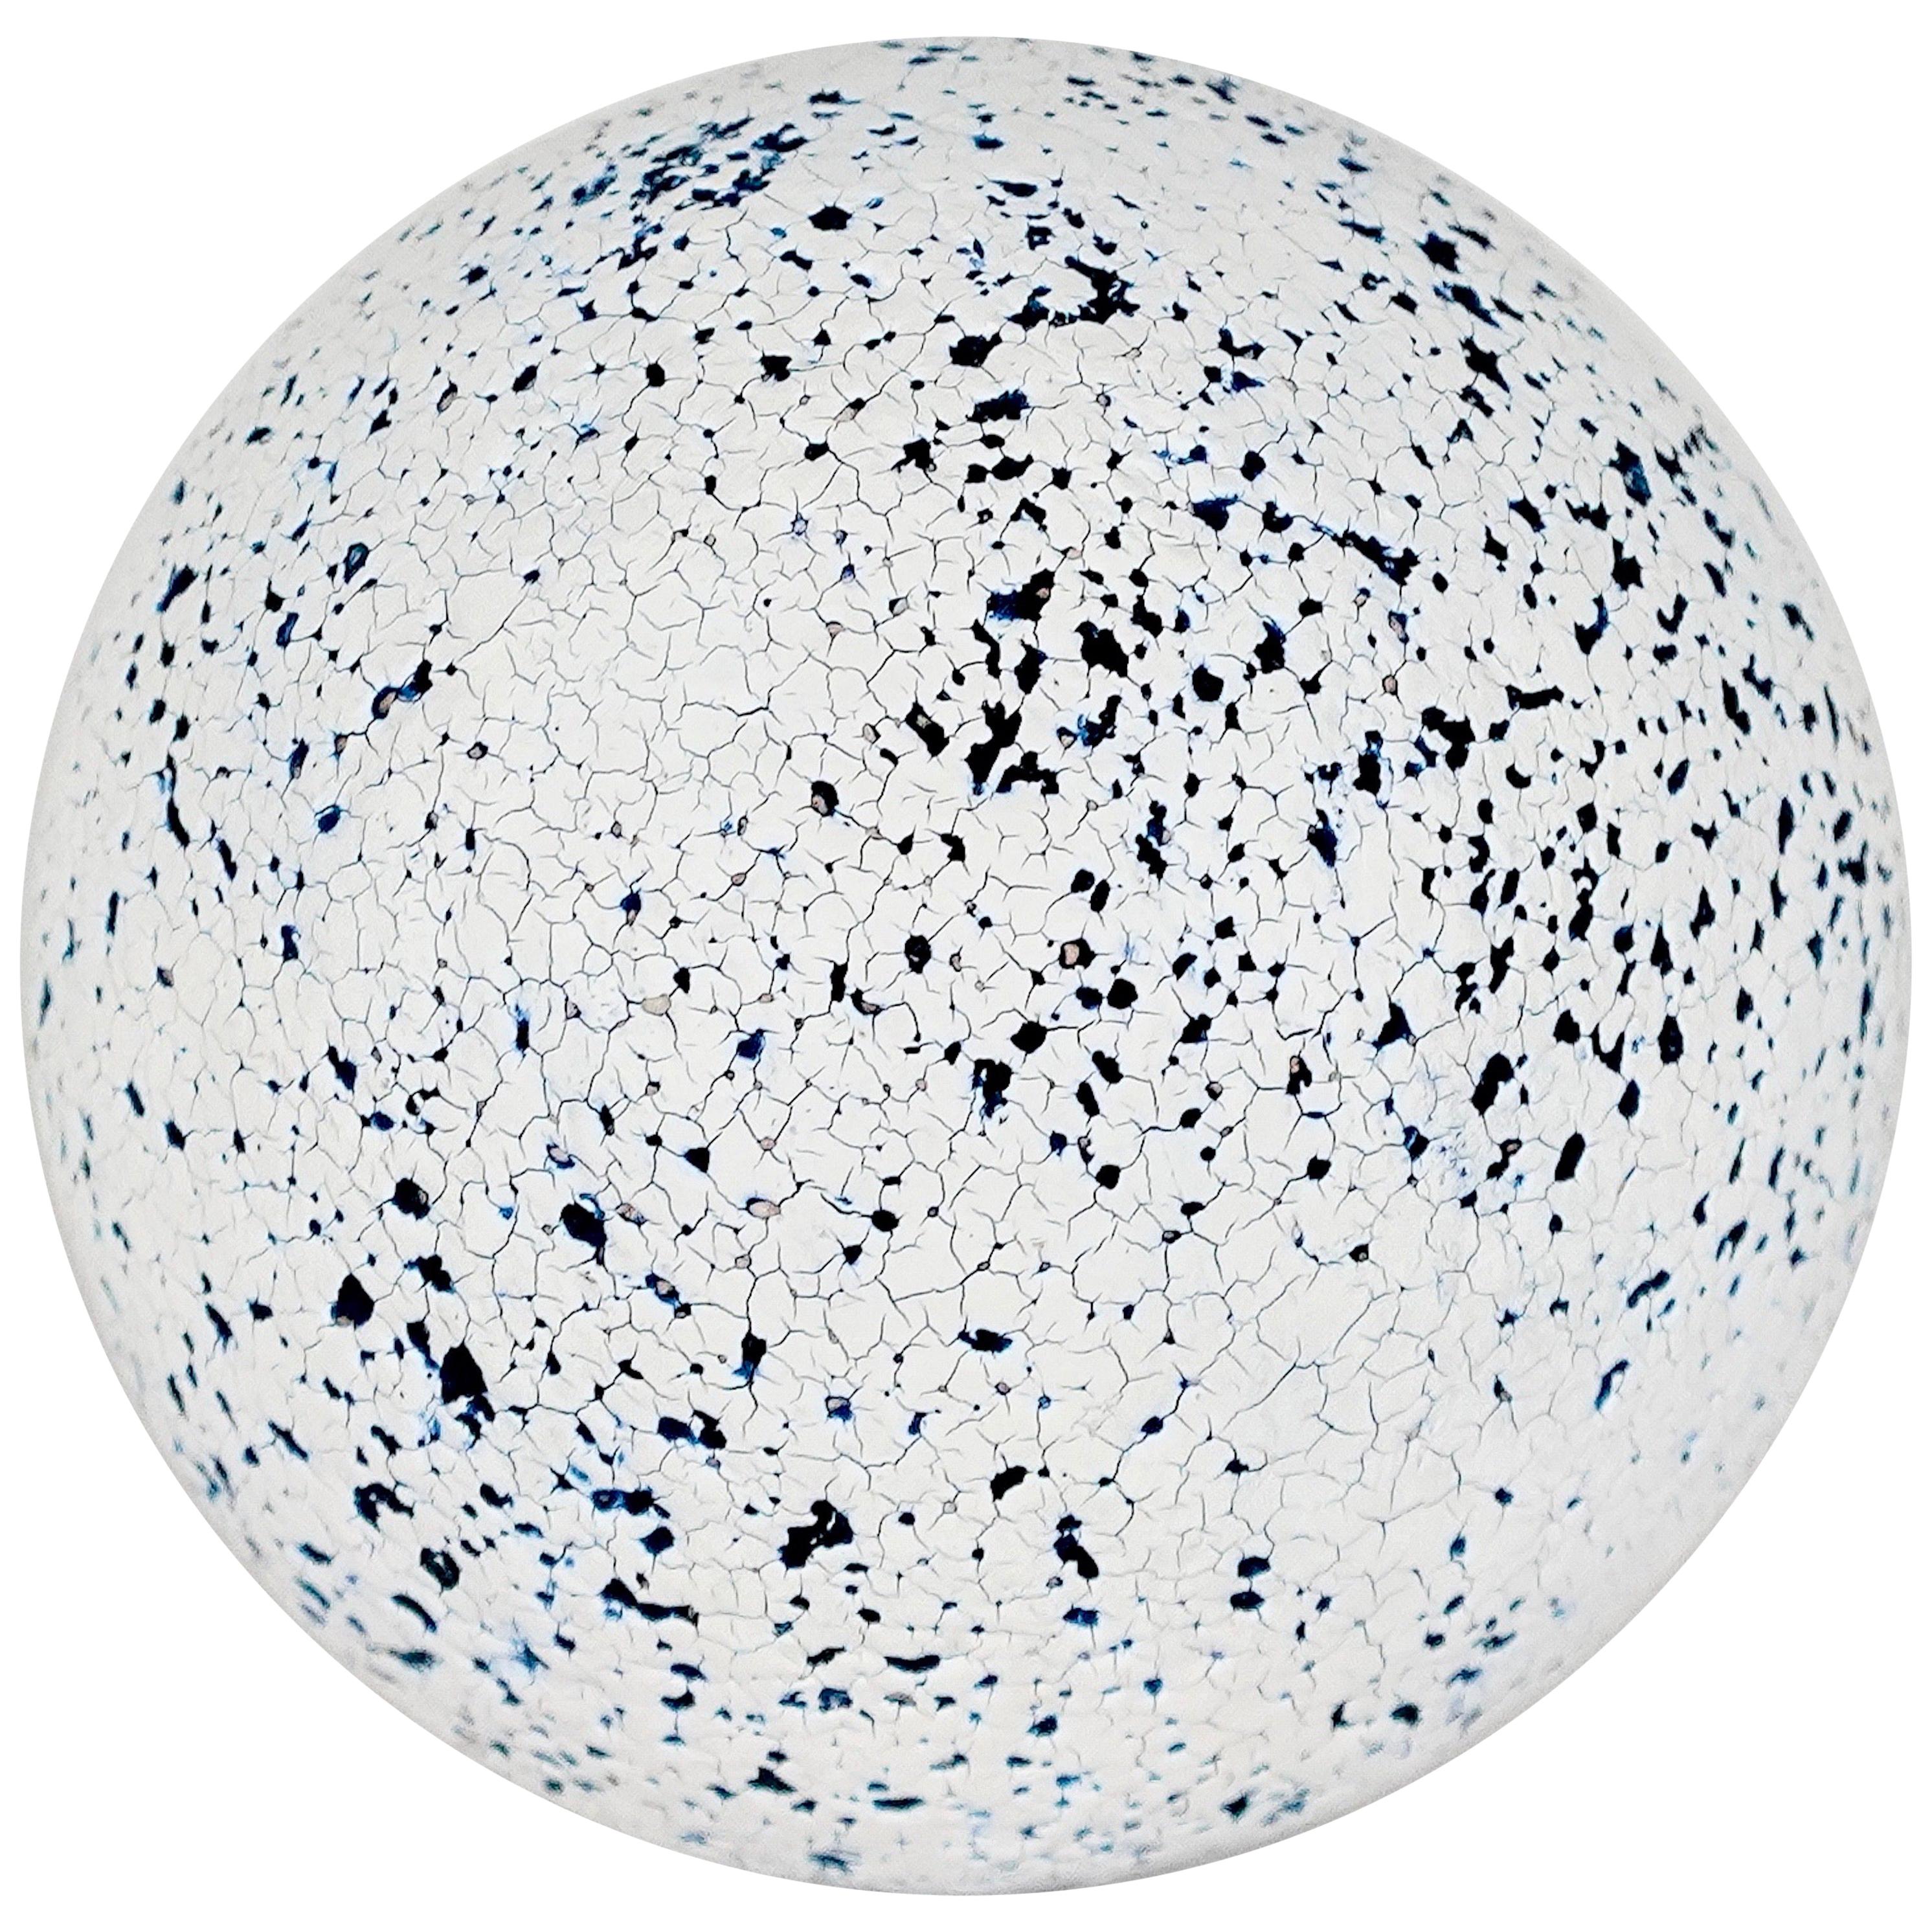 Blue, Black and White Crackle-Surfaced Ceramic Sphere, Hand Built Sculpture For Sale